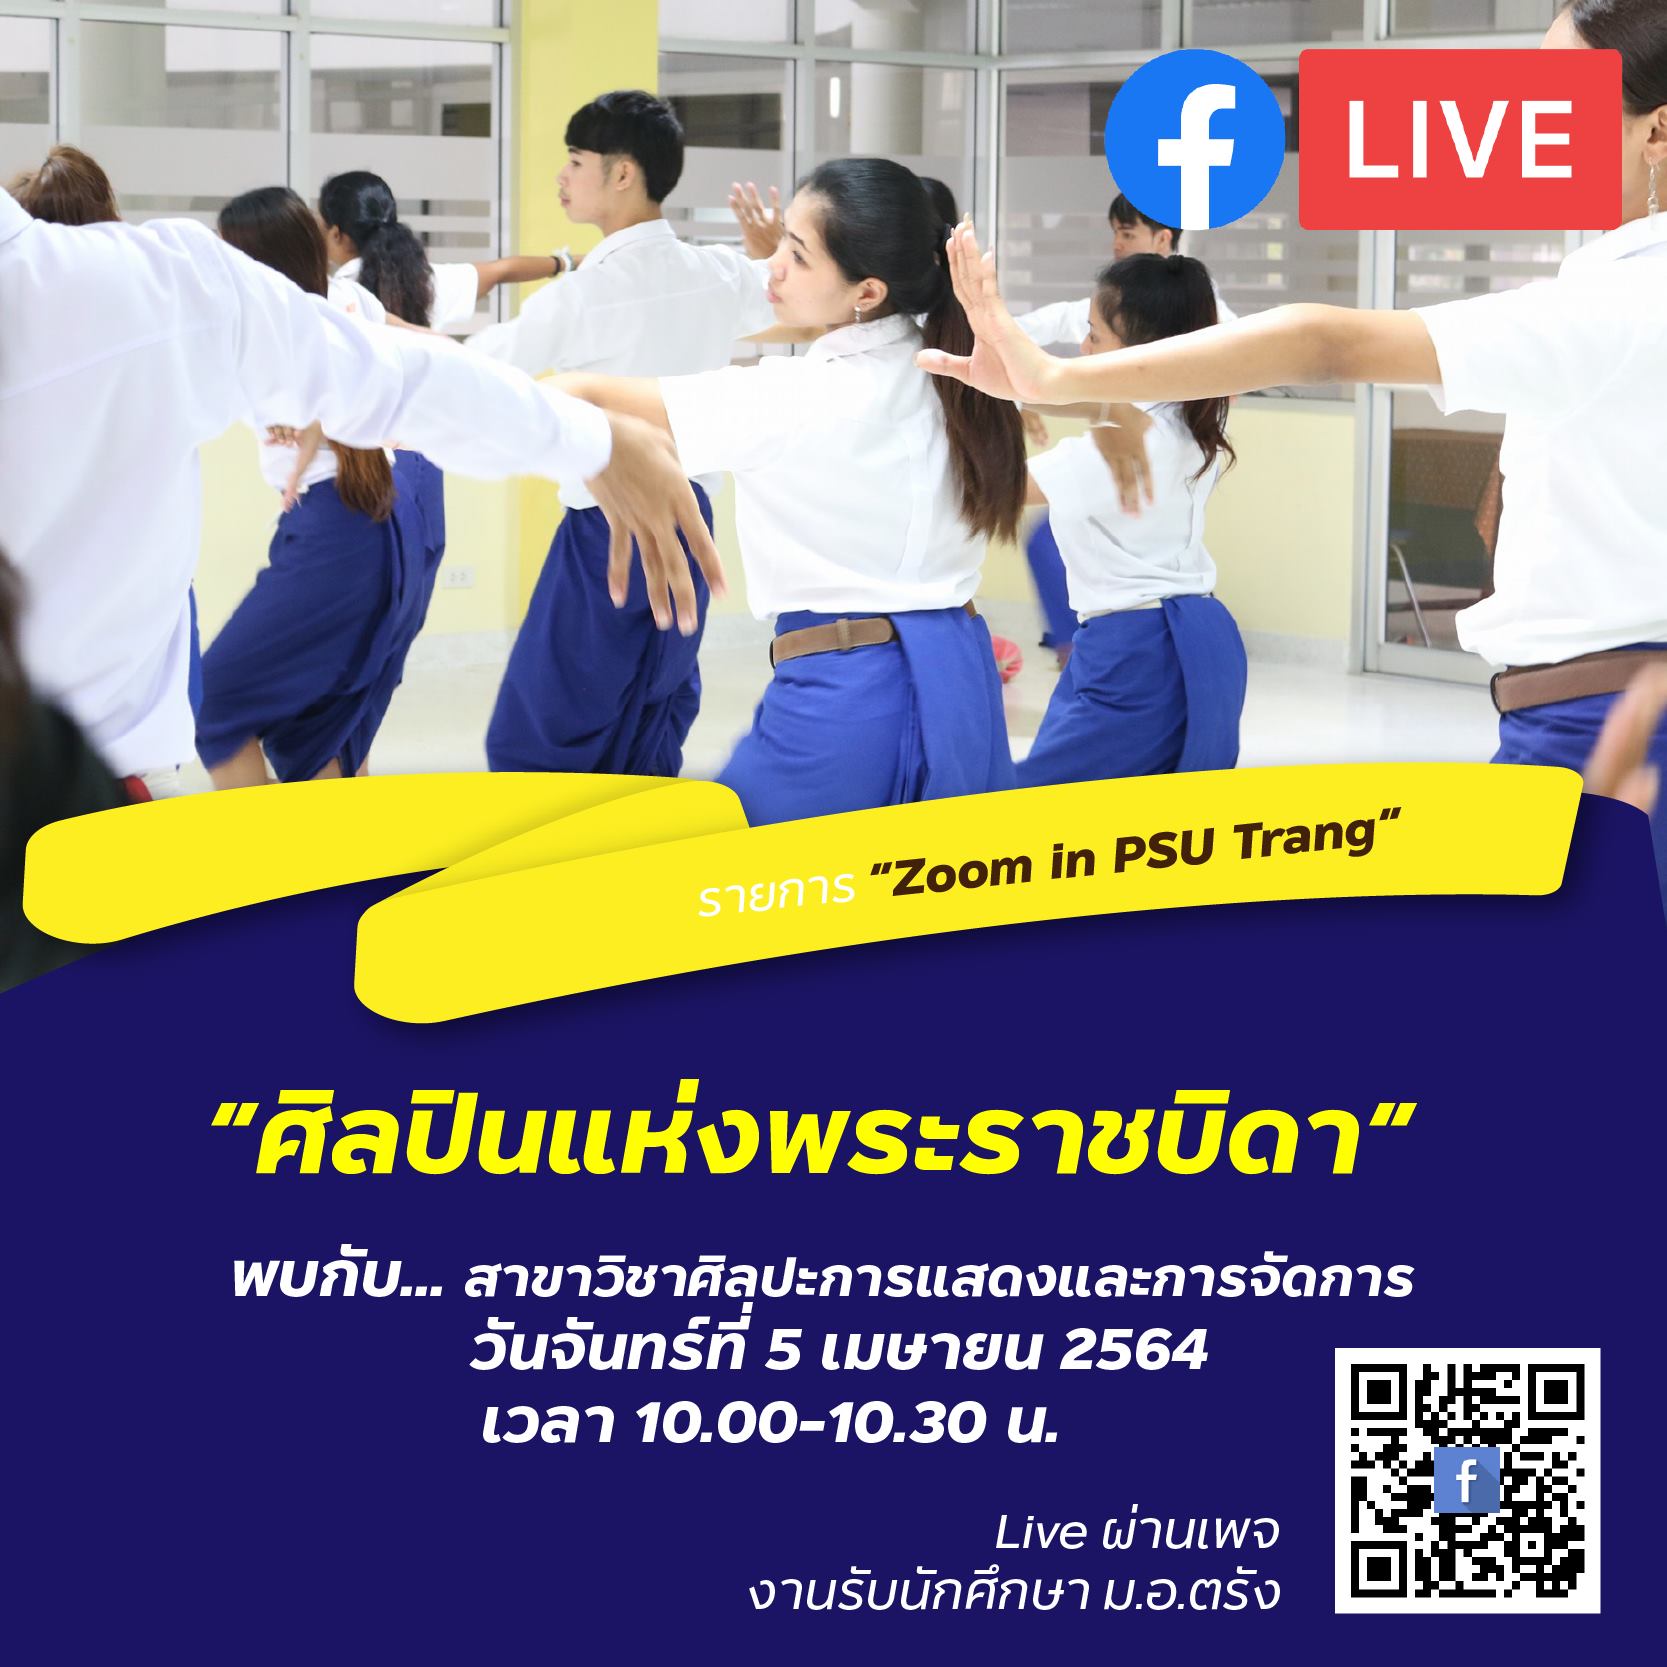 You are currently viewing Zoom in PSUTRANG ตอน “ศิลปินแห่งพระราชบิดา”